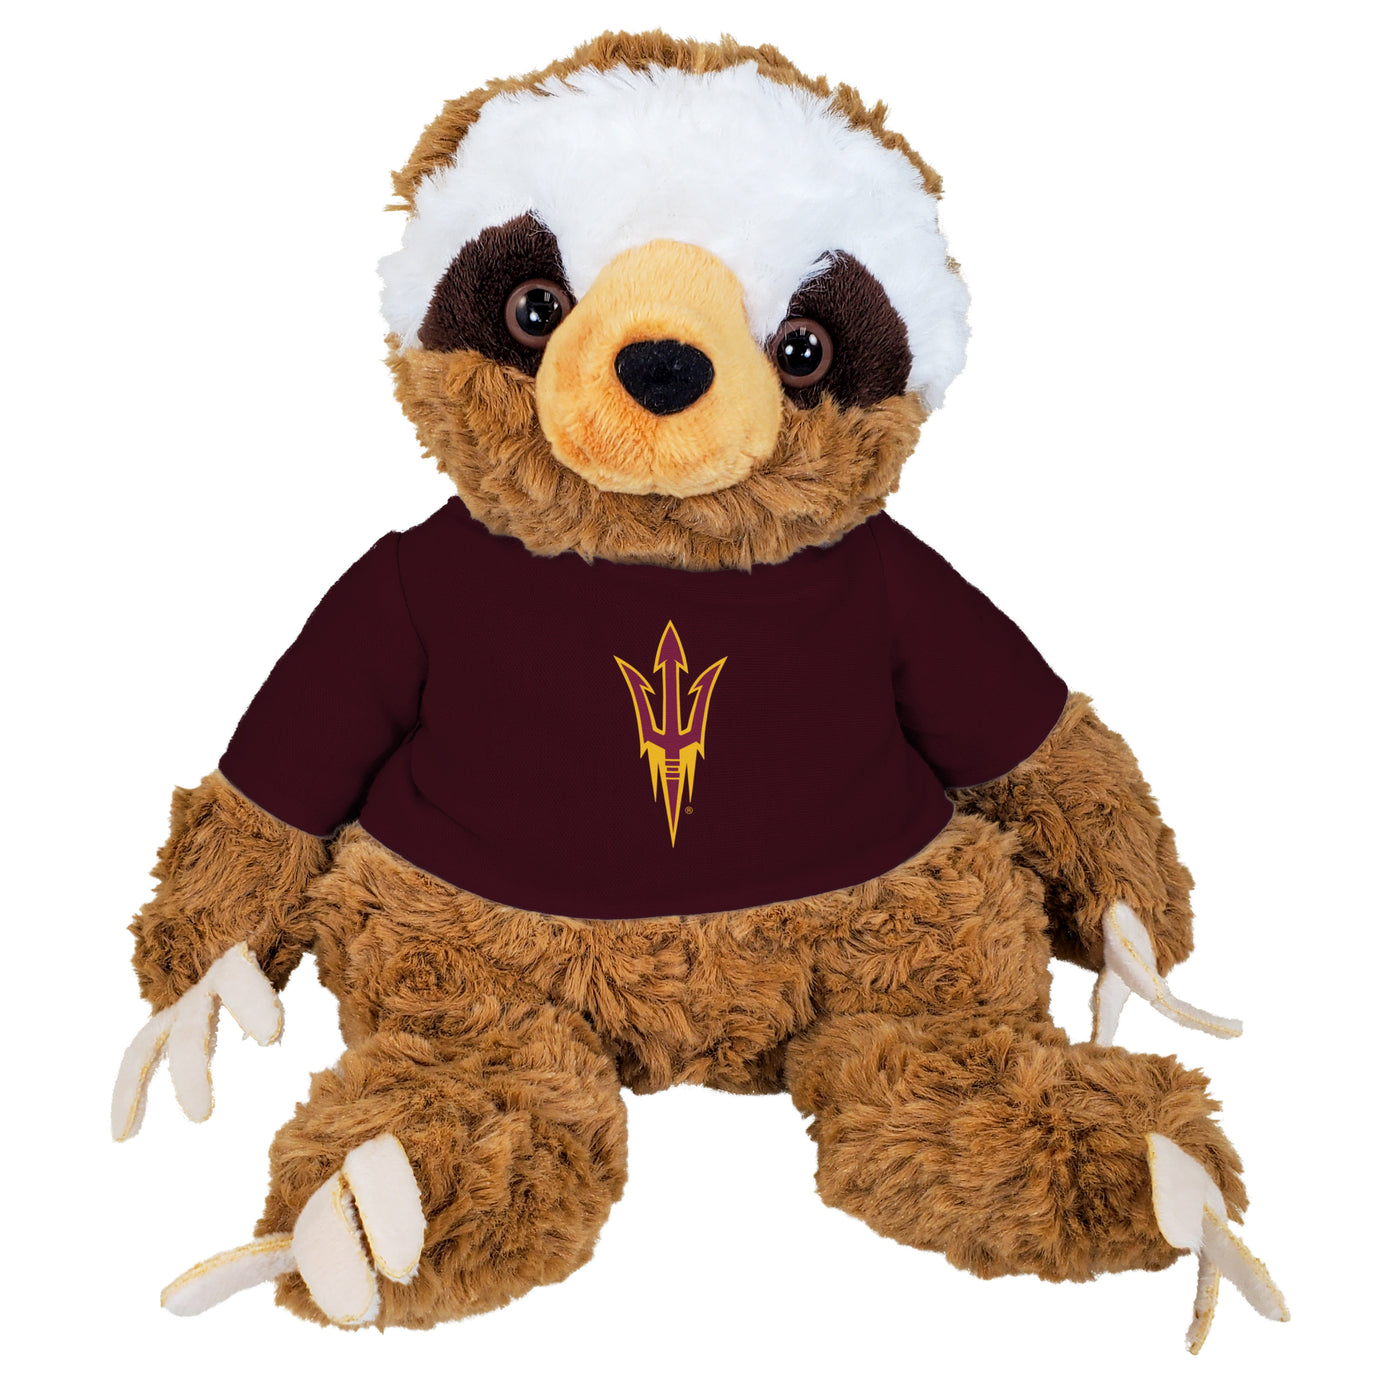 ASU stuffed brown and white sloth wearing a maroon shirt with a gold pitchfork outline. 